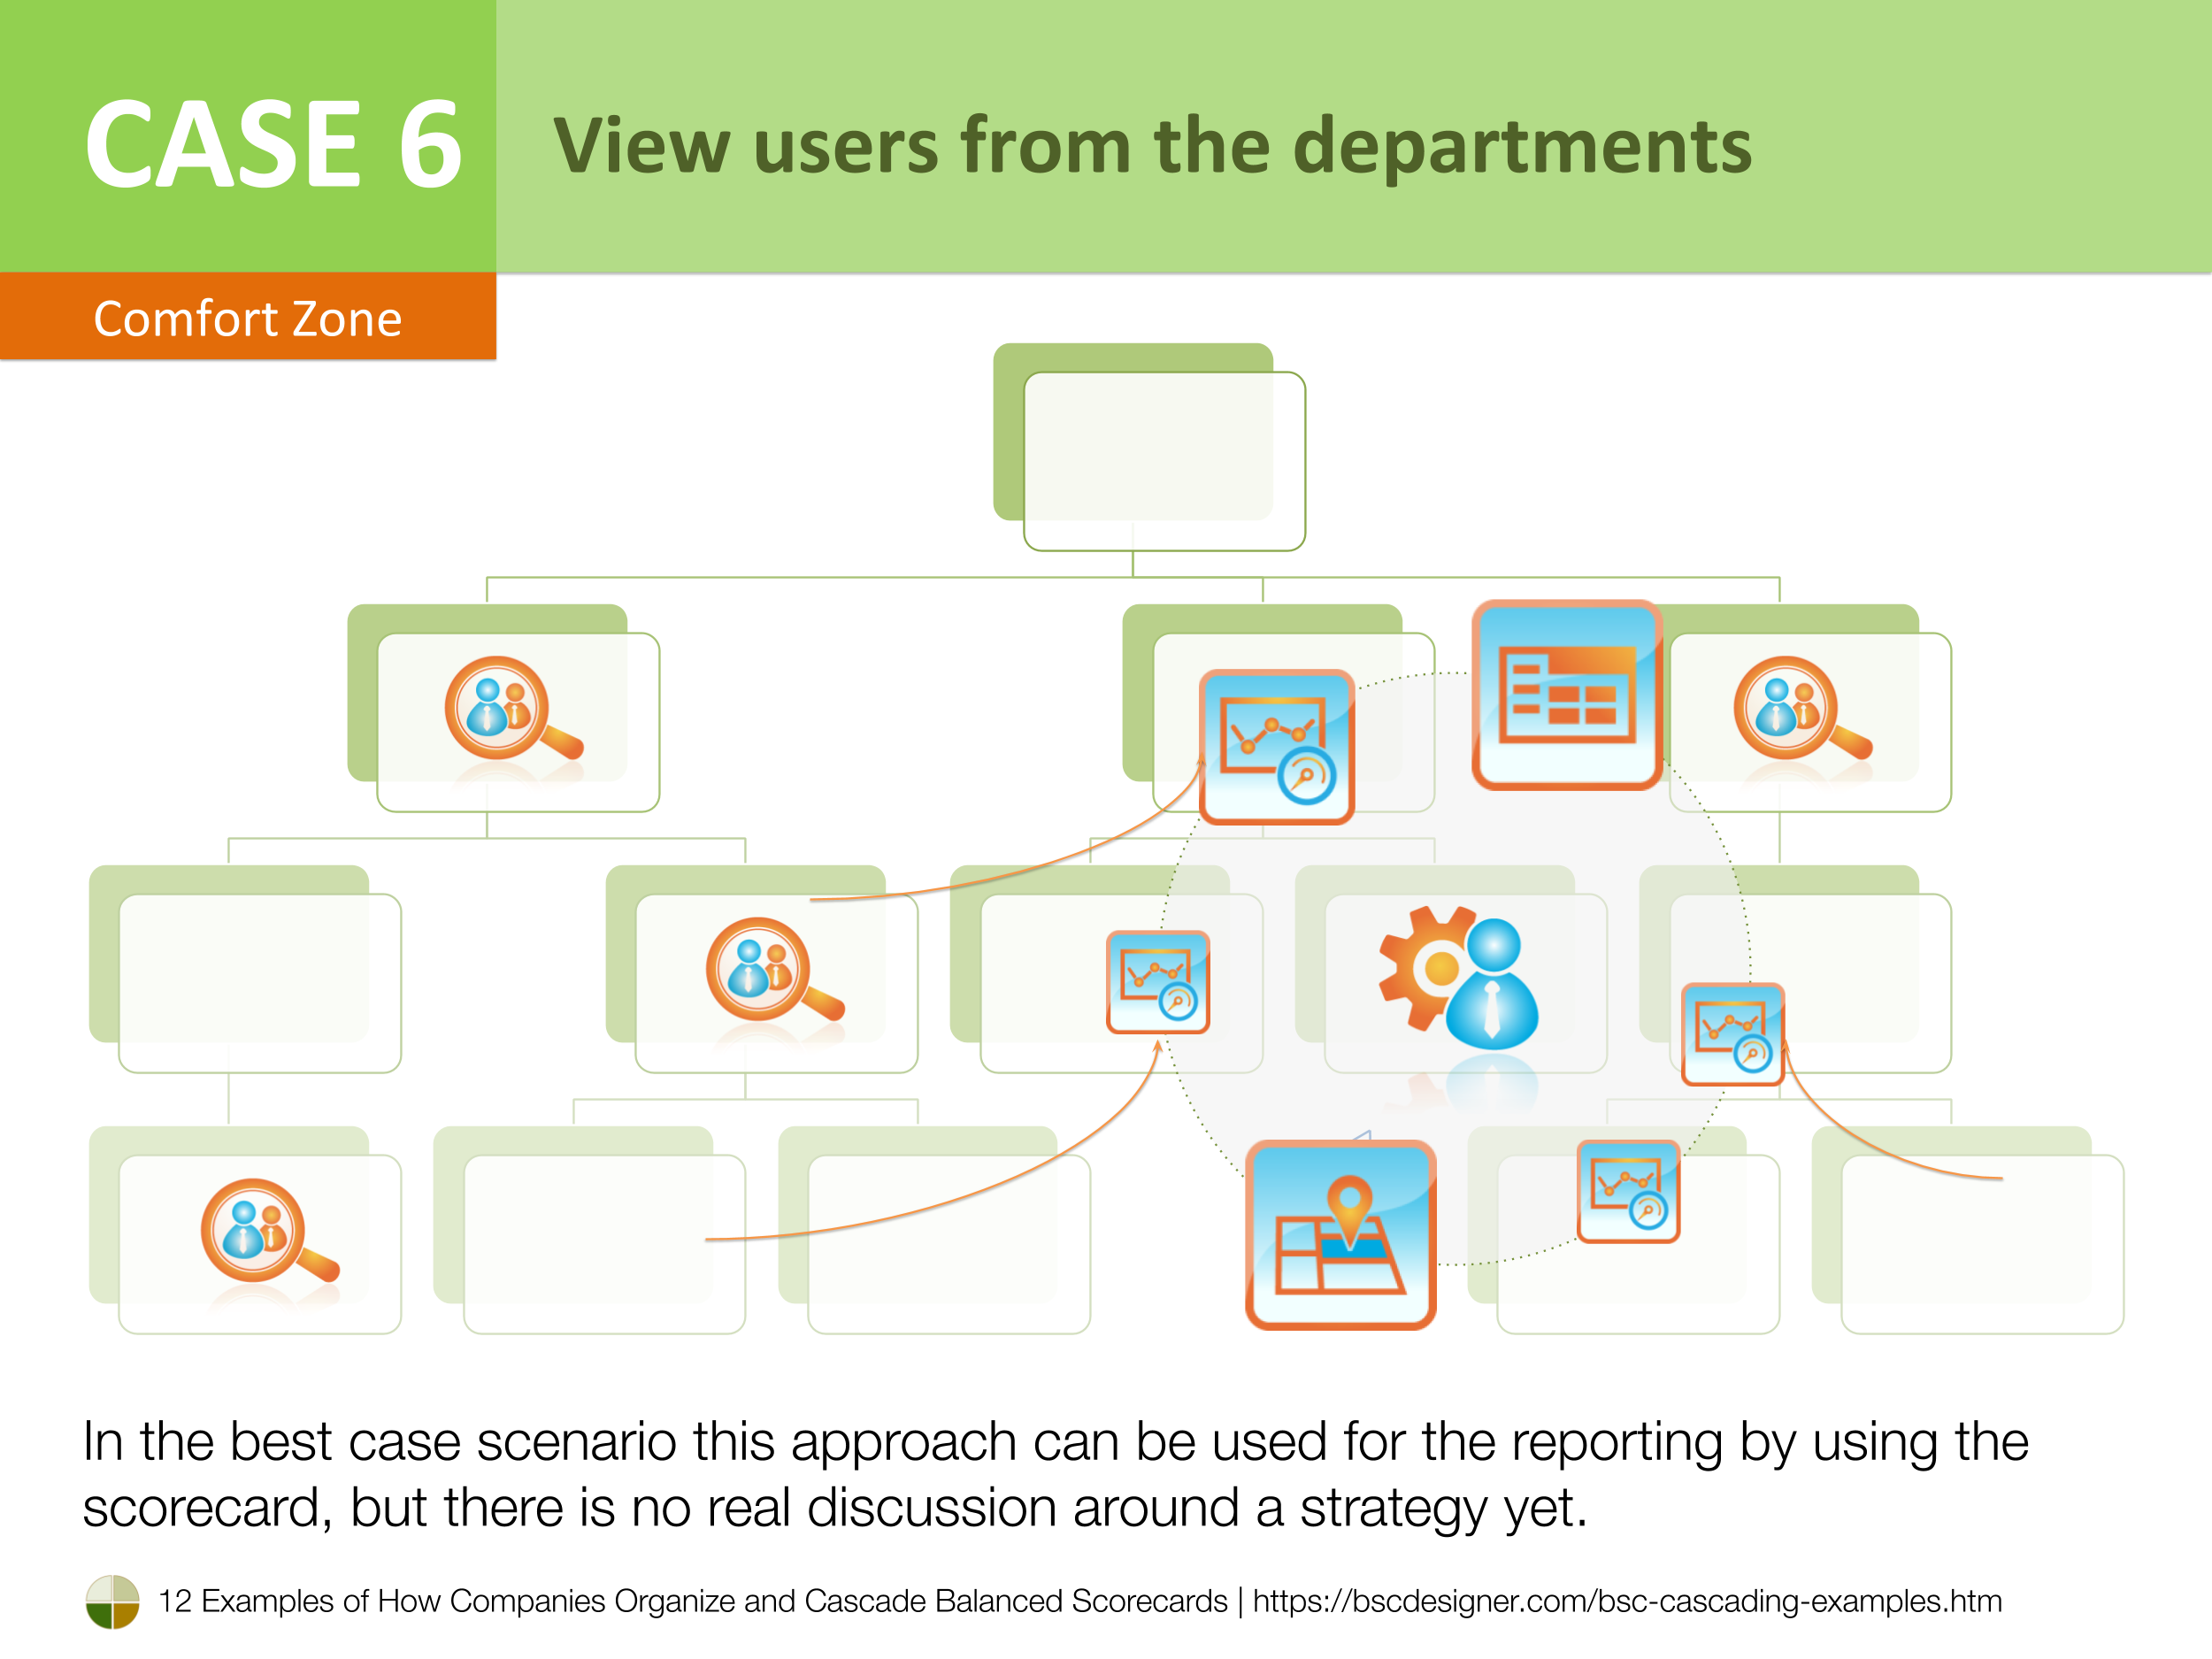 Case 6 - View users from the departments